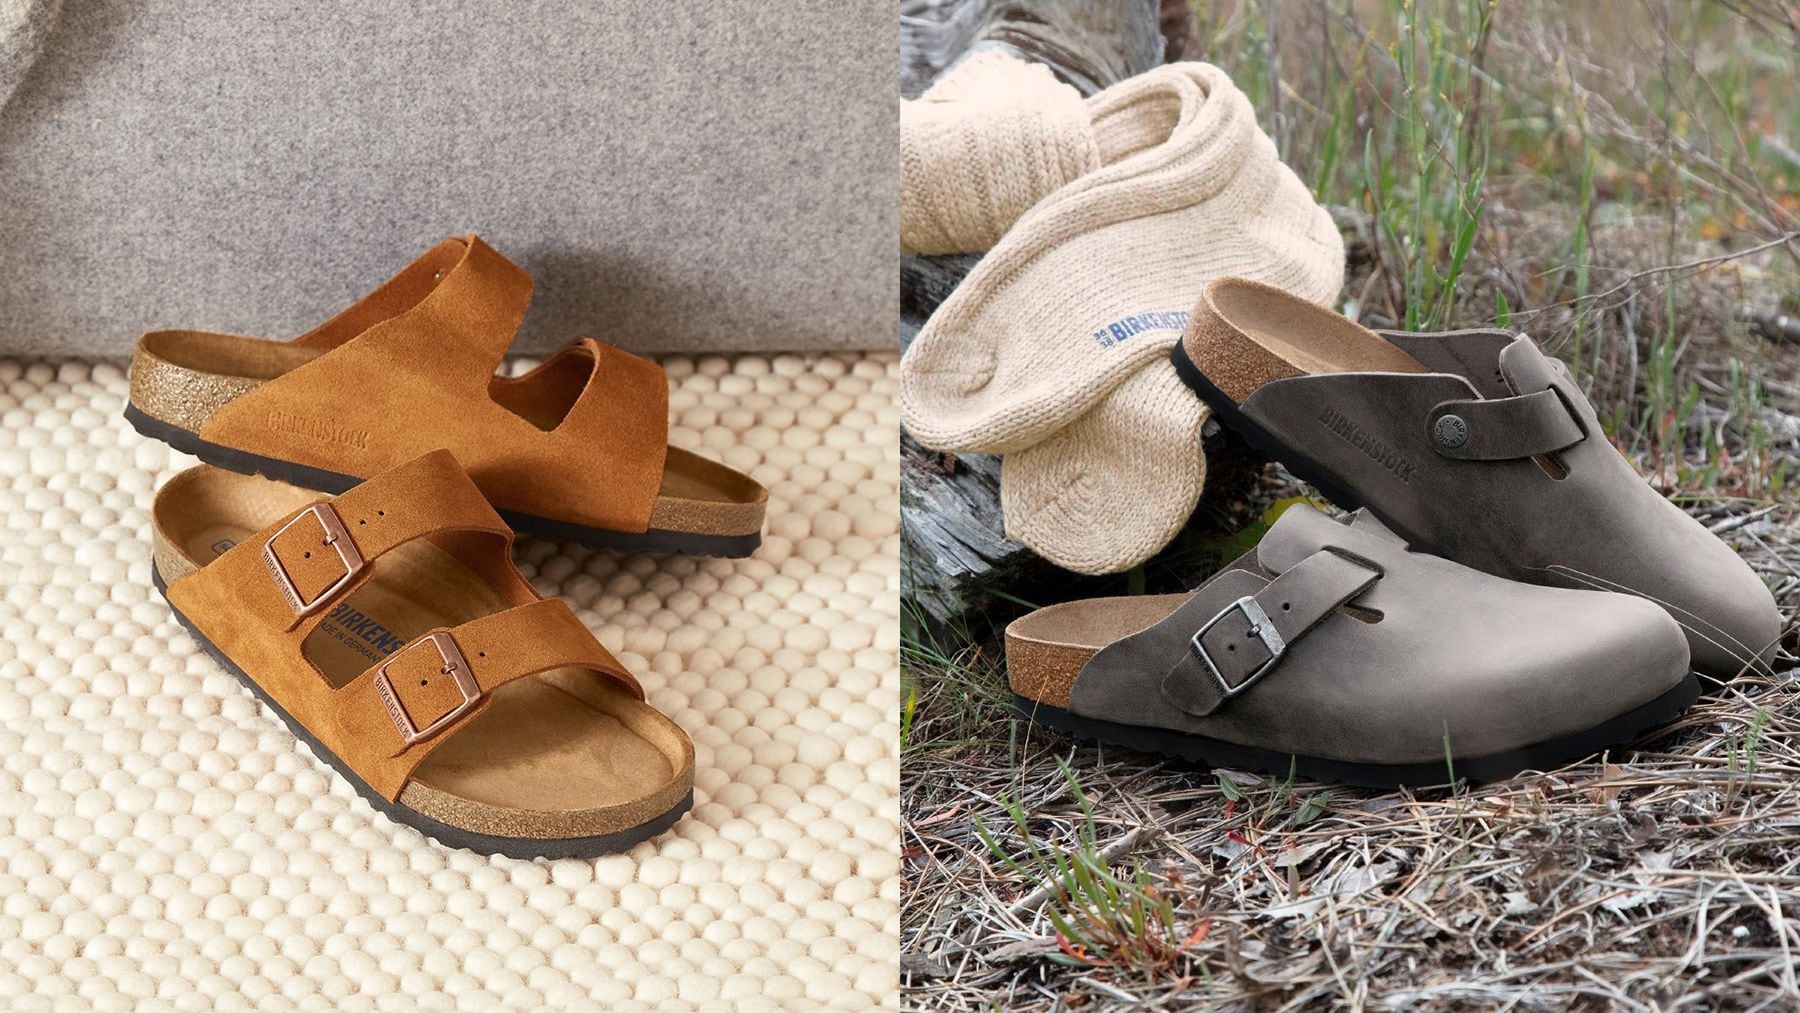 L Catterton has made a big bet on Birkenstock, which is slated to